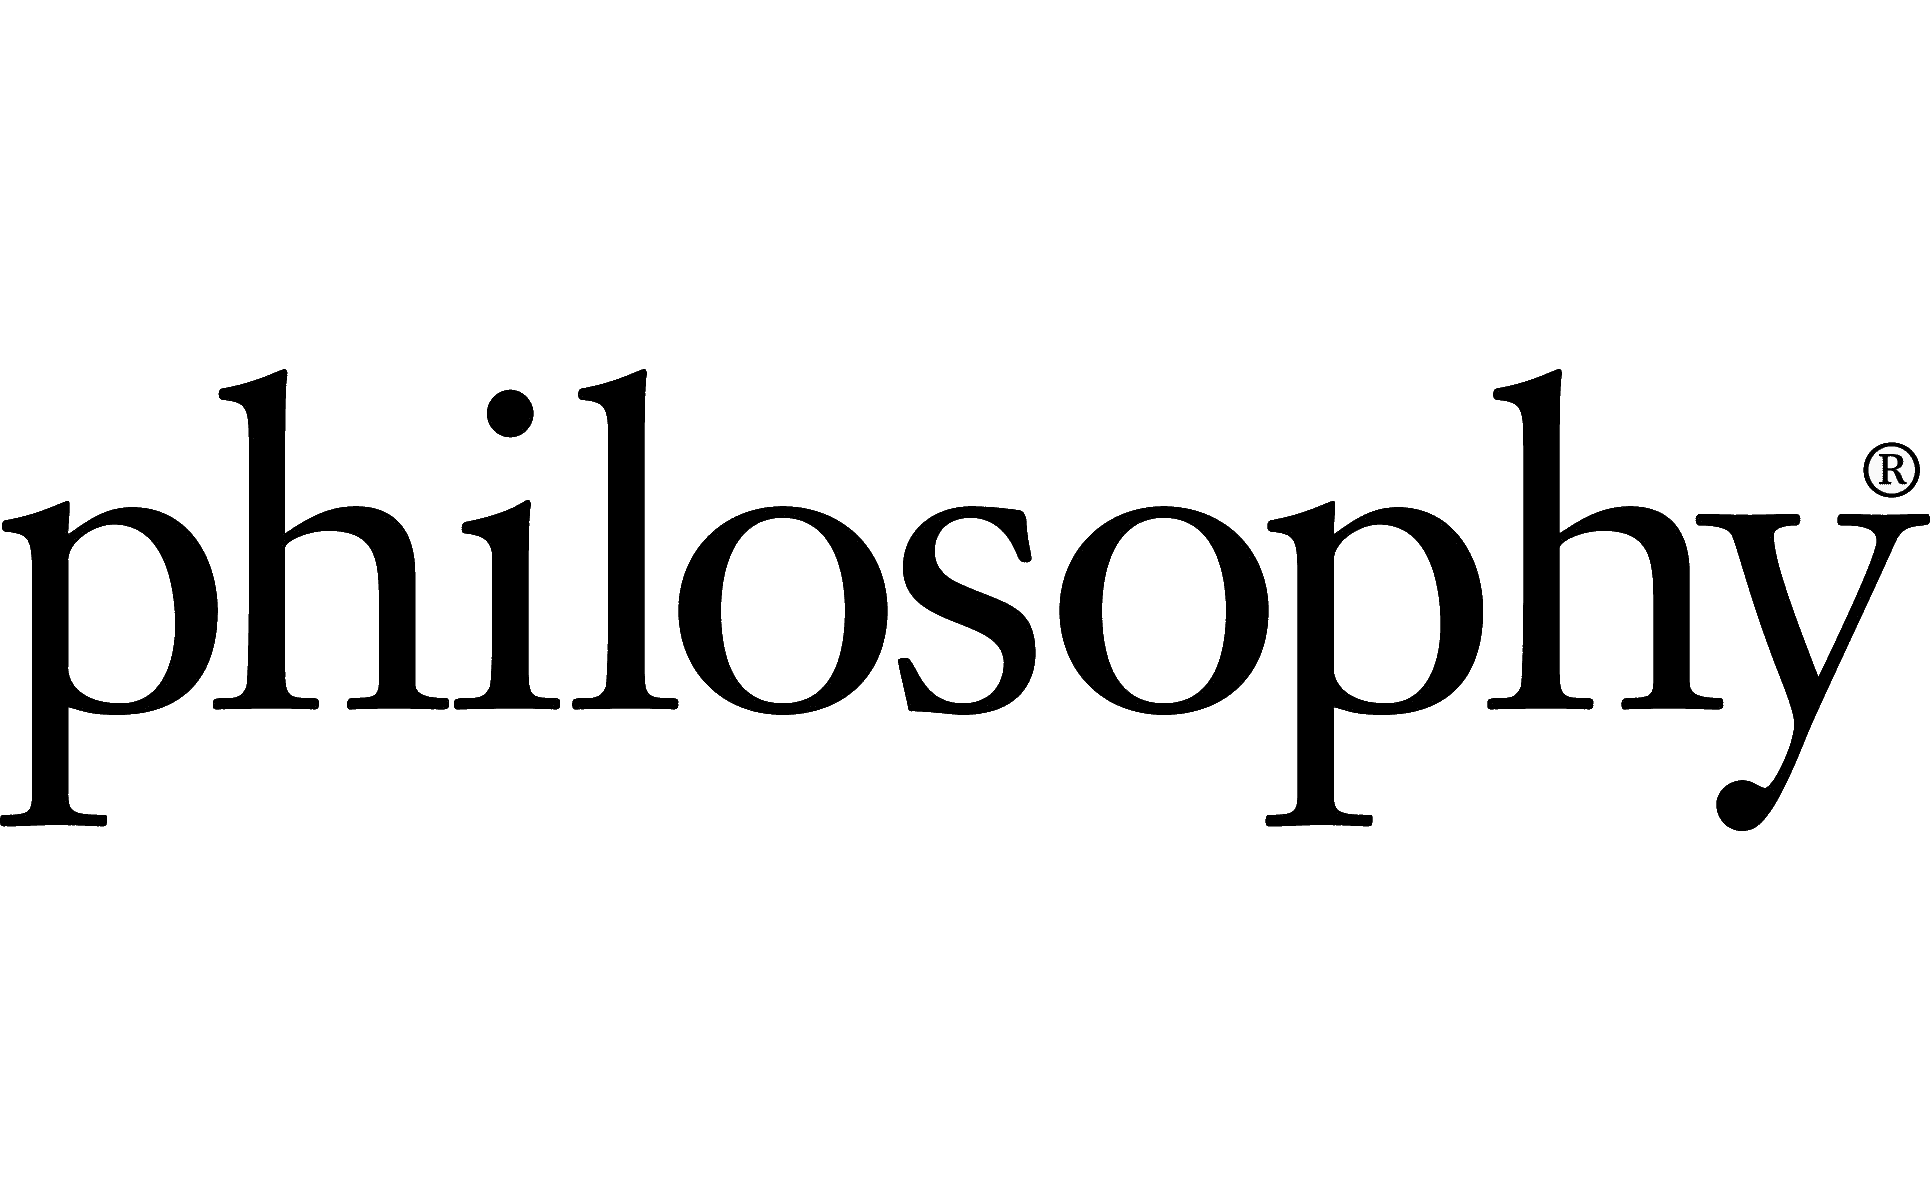 Philosophy coupon codes, promo codes and deals